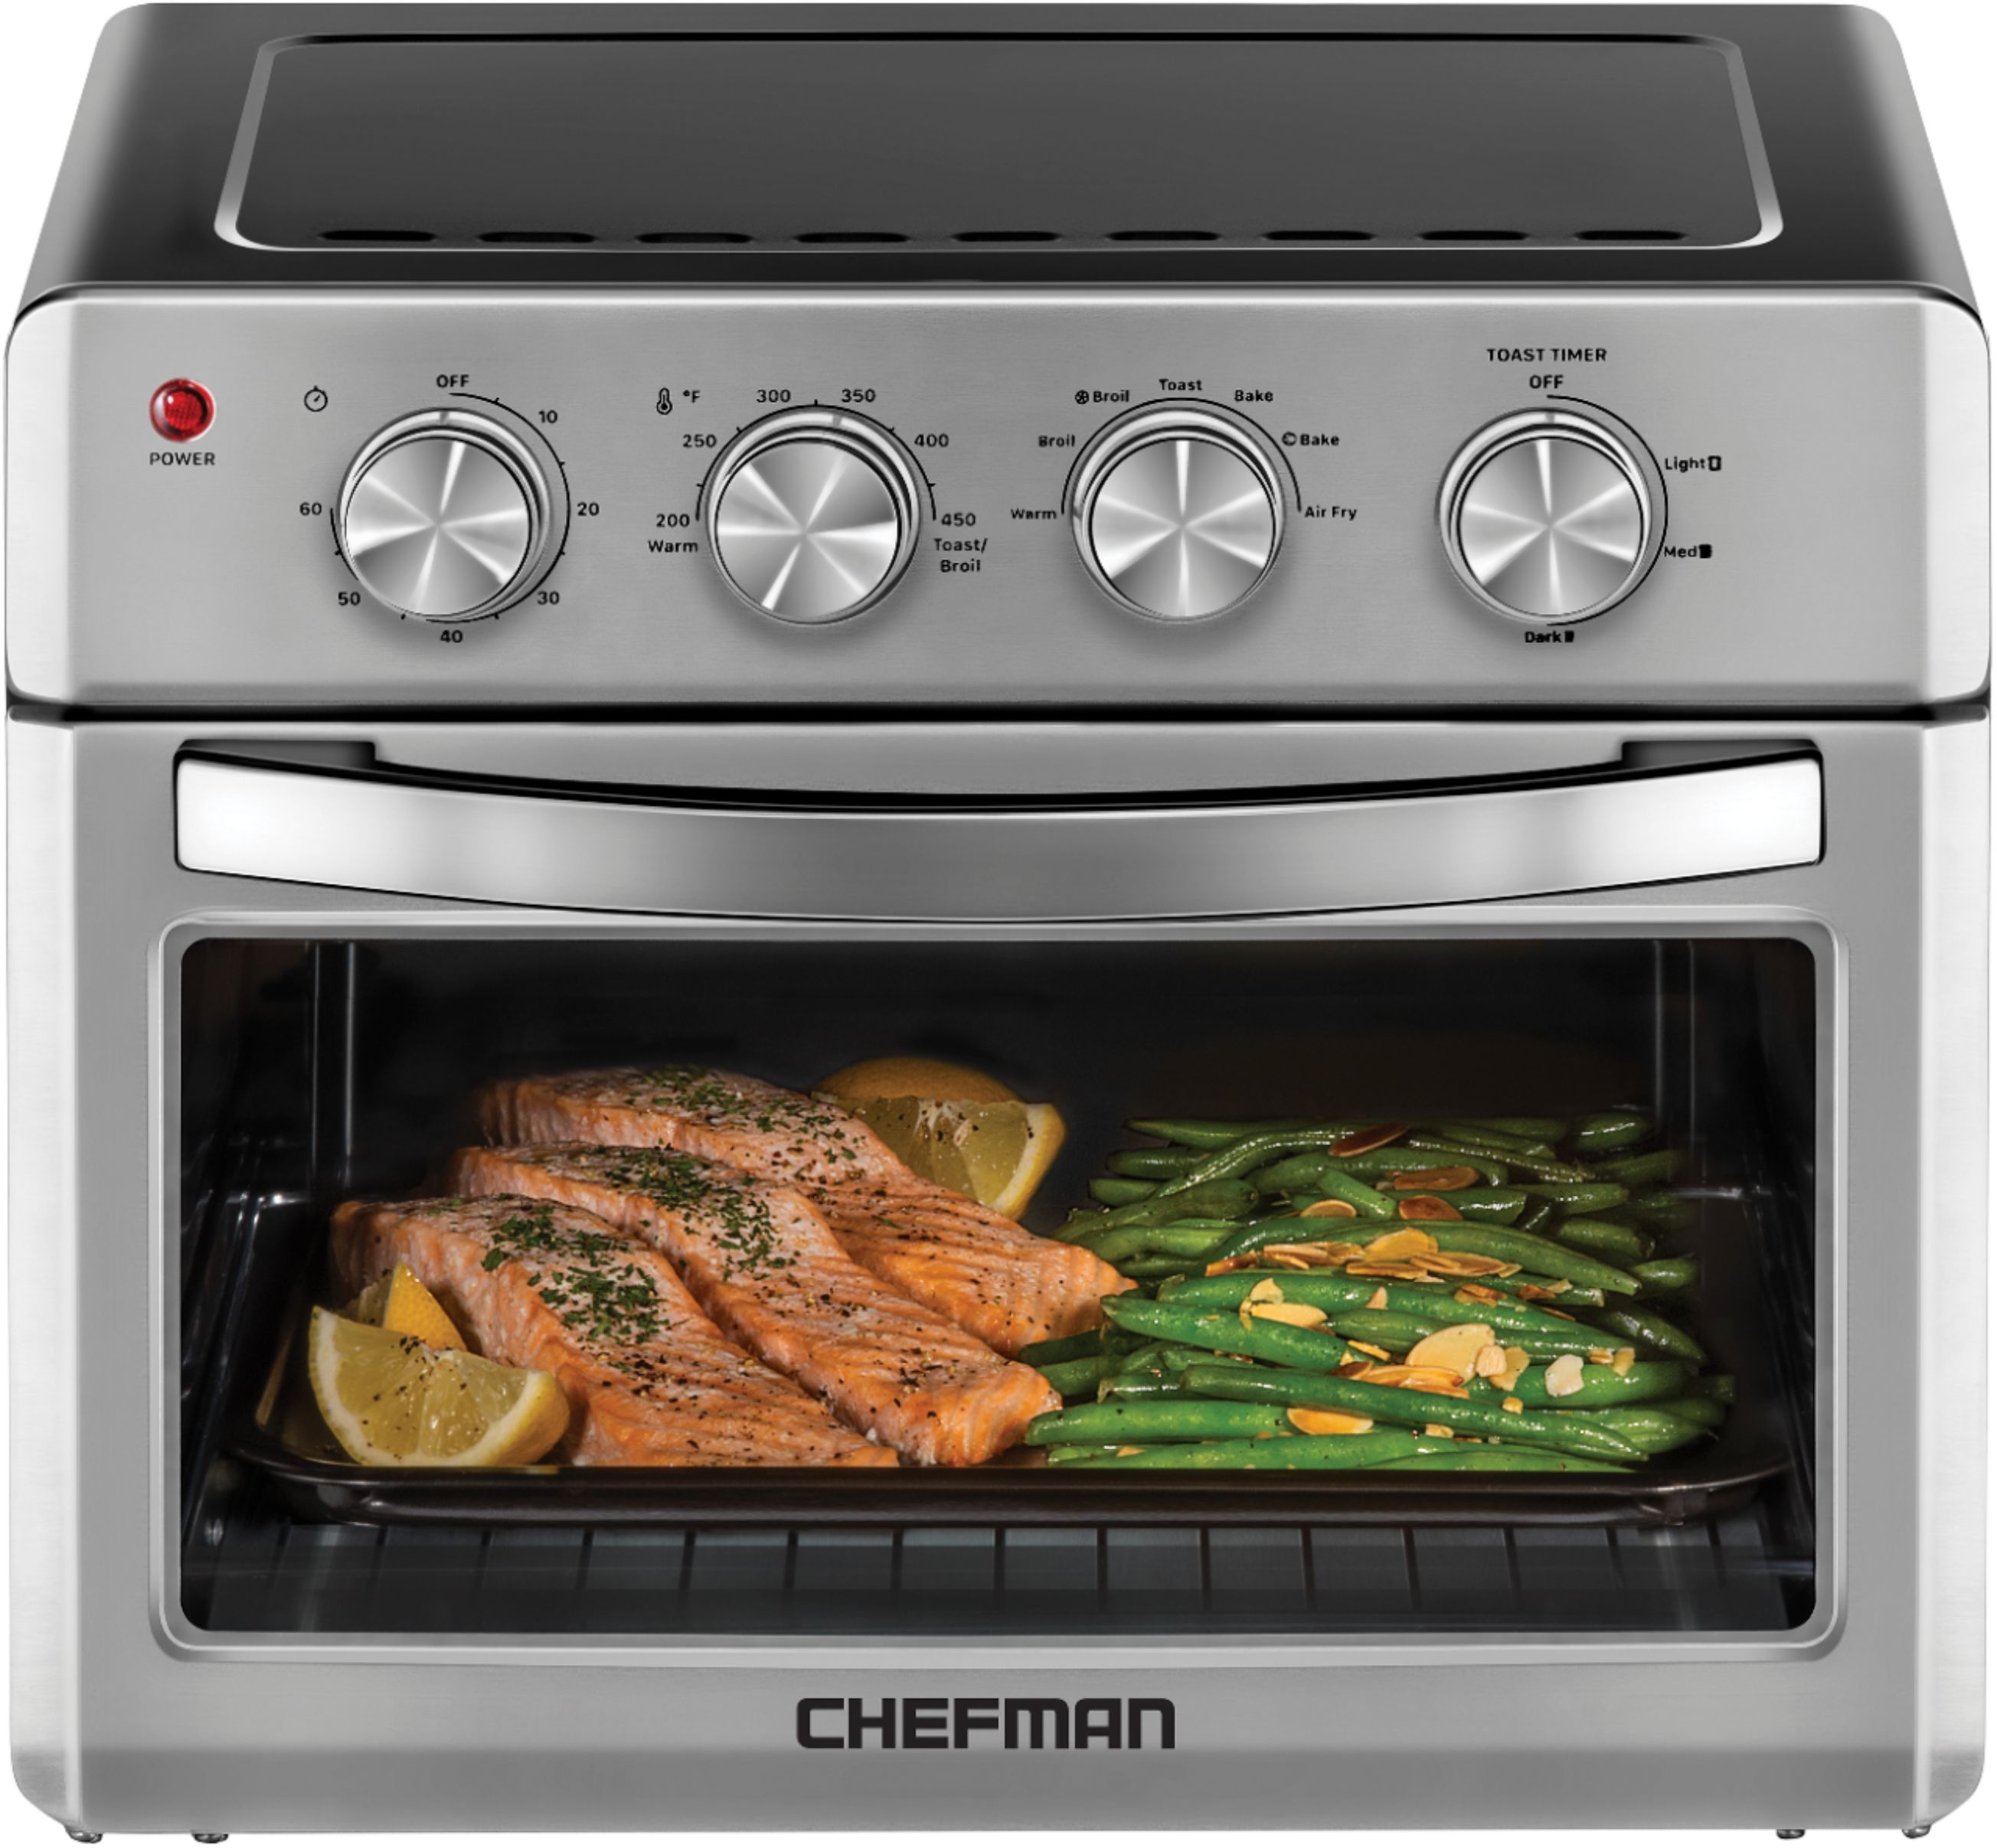 Chefman 25l Toaster Oven Air Fryer Stainless Steel Rj50 M Best Buy